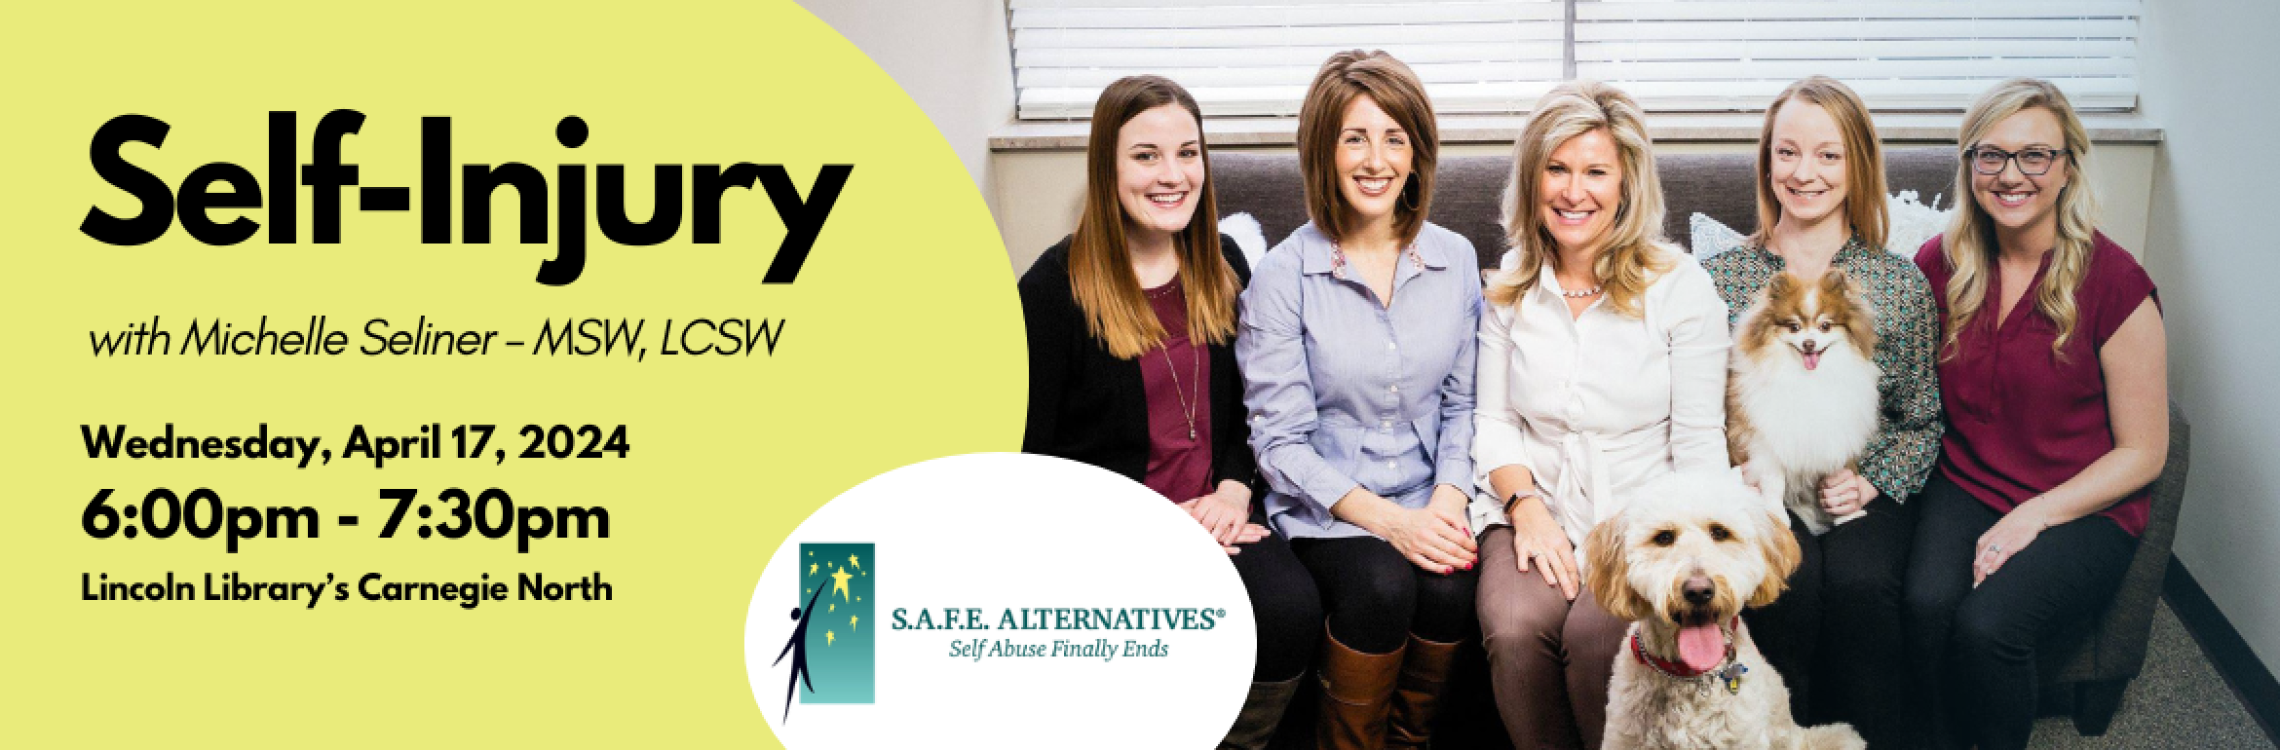 Photo of counseling team smiling while sitting down with a lime green overlay reading "Self-injury" with Michelle Seliner April 17th 6:00pm - 7:00pm